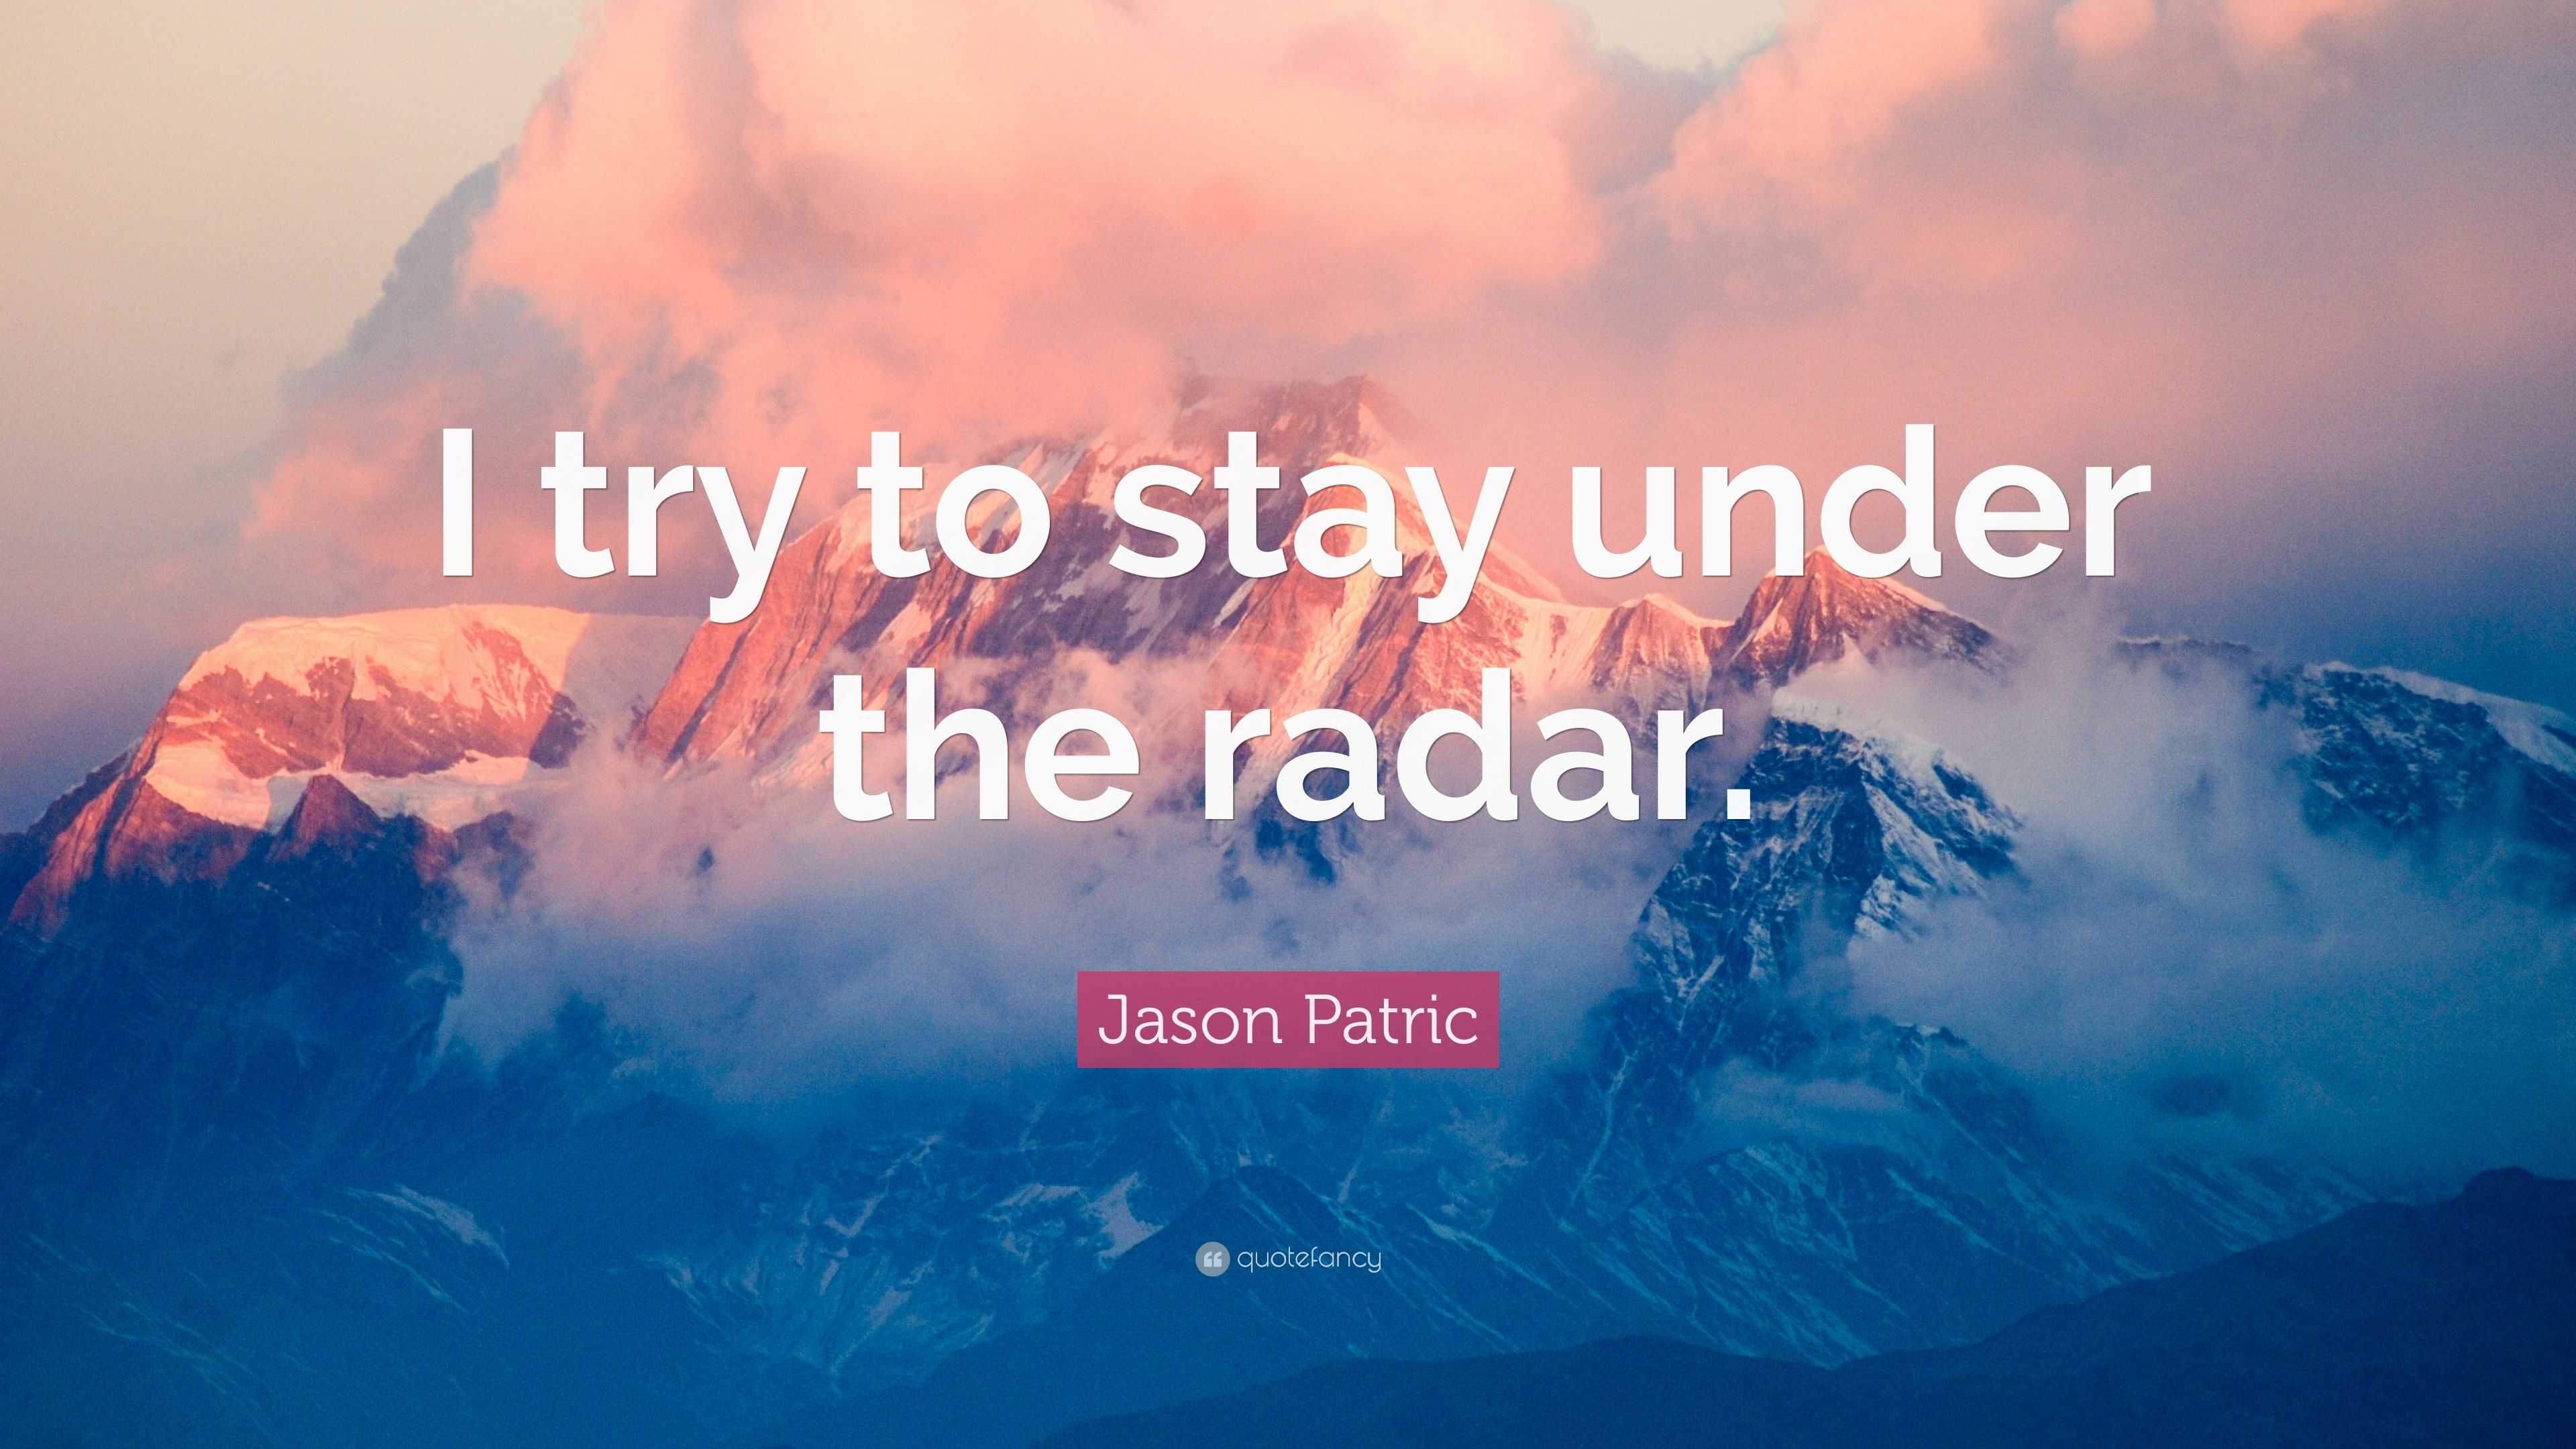 Jason Patric Quote: I try to stay under the radar